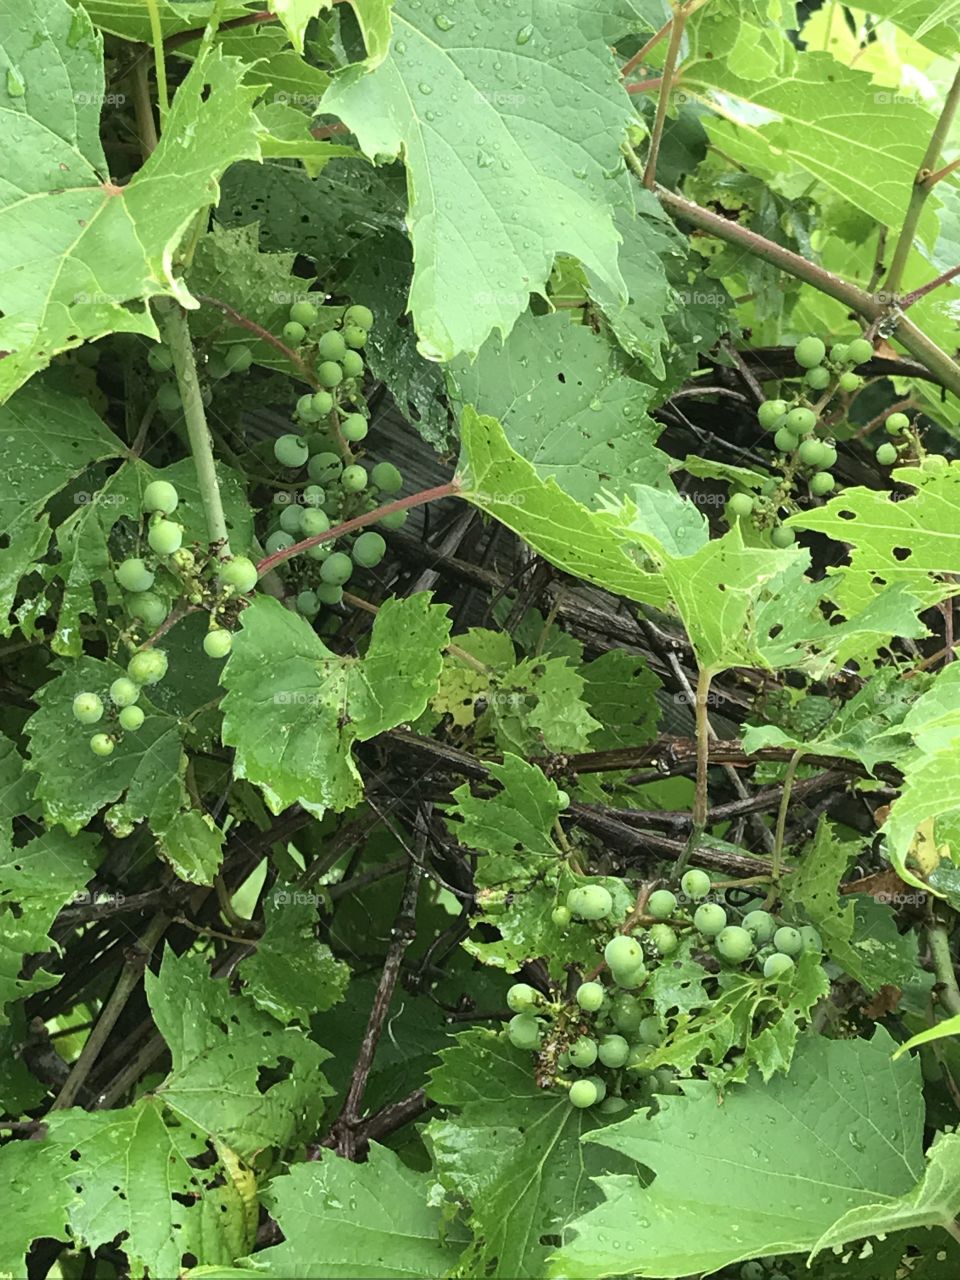 Grapes not ready yet